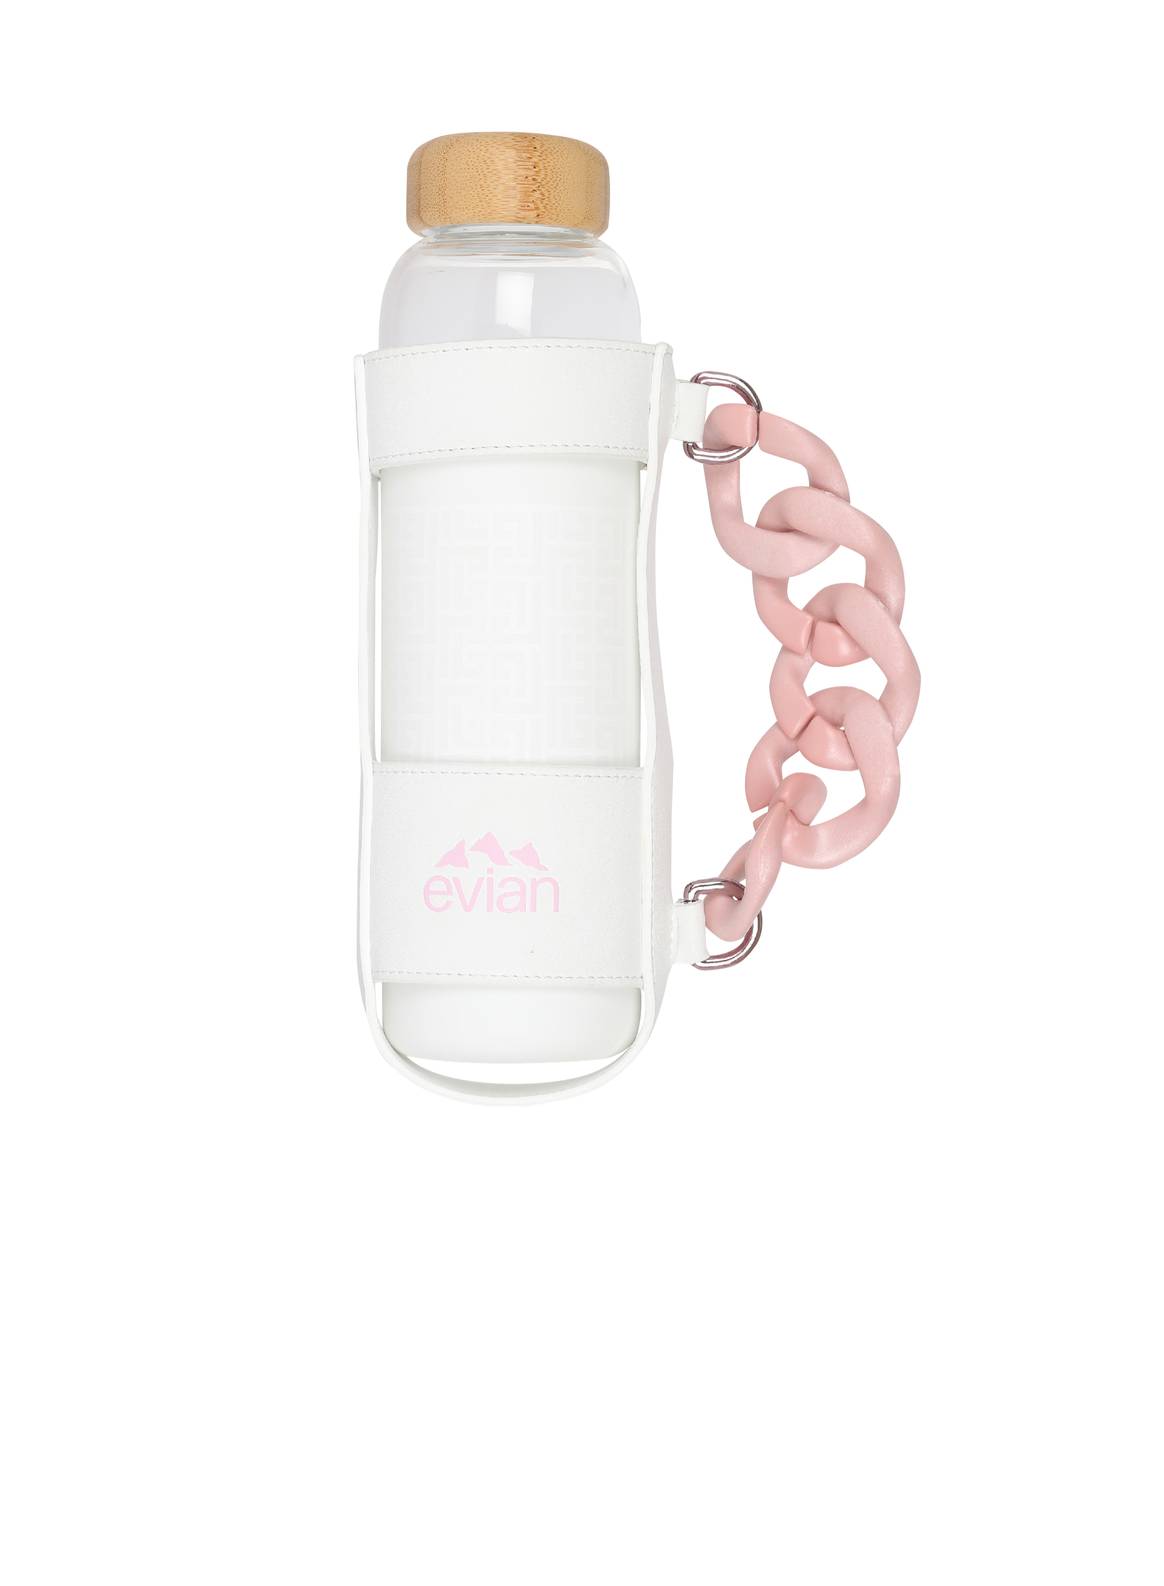 Image: Evian; Balmain x Evian collection of ready-to-wear and accessories